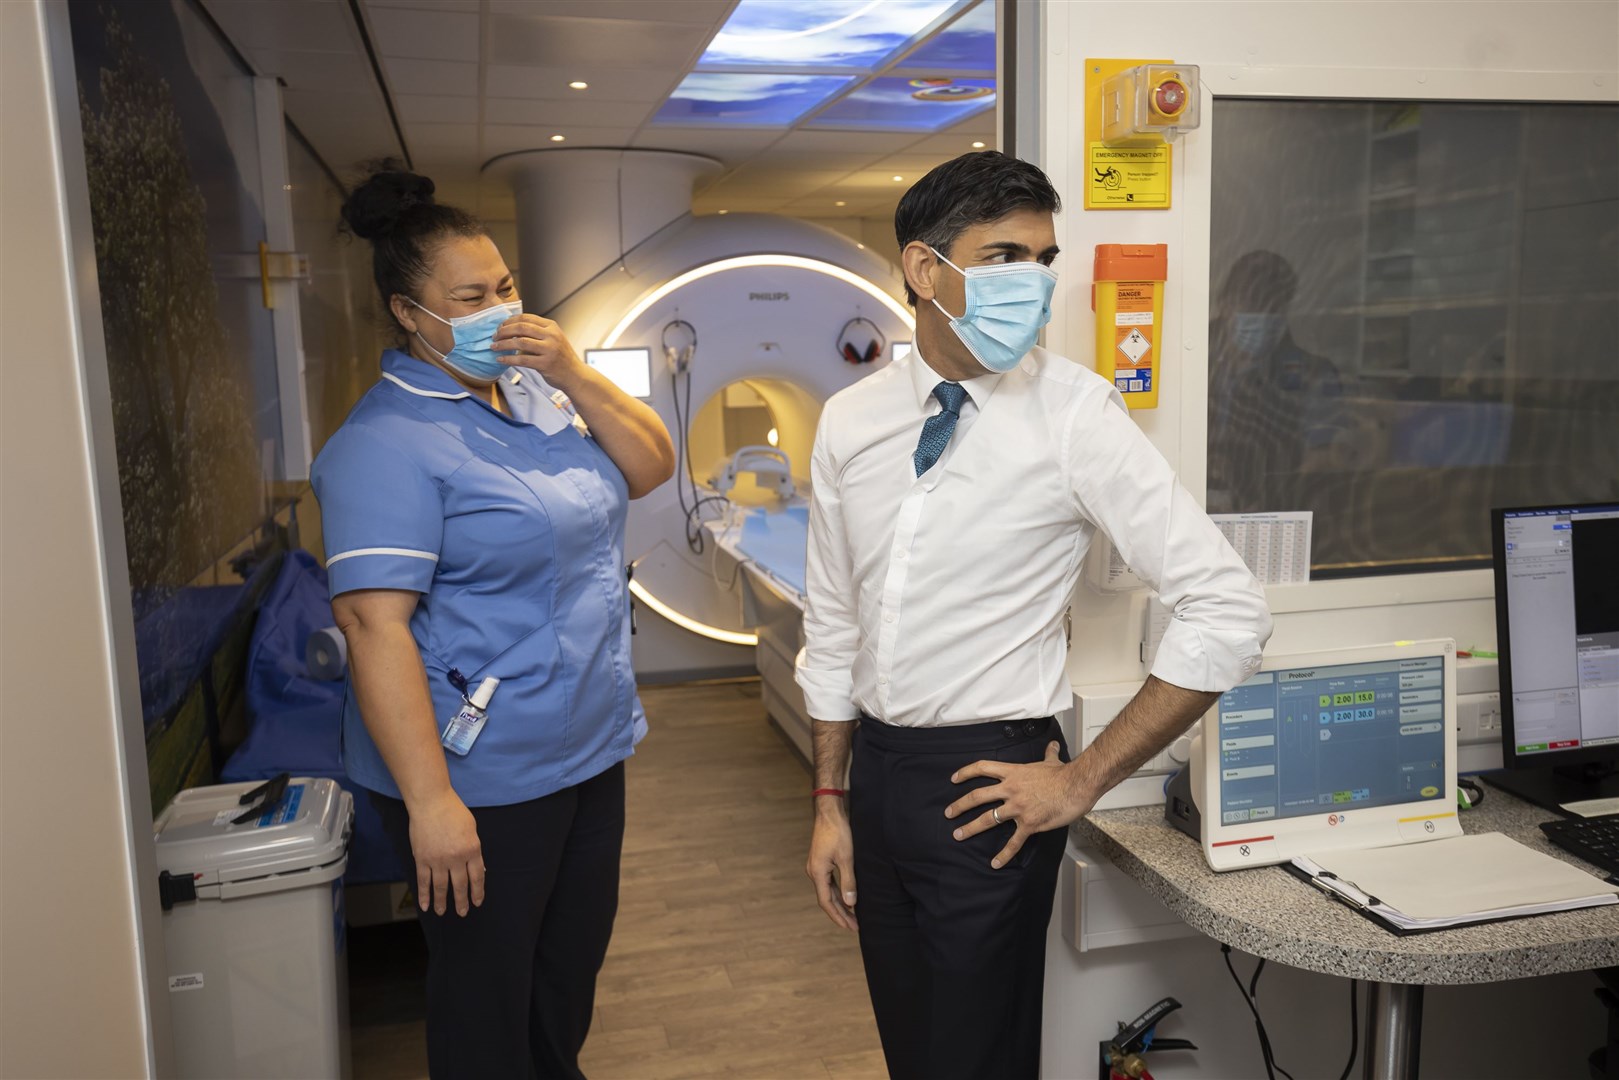 Prime Minister Rishi Sunak during a visit to Oldham Community Diagnostic Centre in Oldham, Greater Manchester. He said it was right to let the independent investigation conclude (James Glossop/The Times/PA)